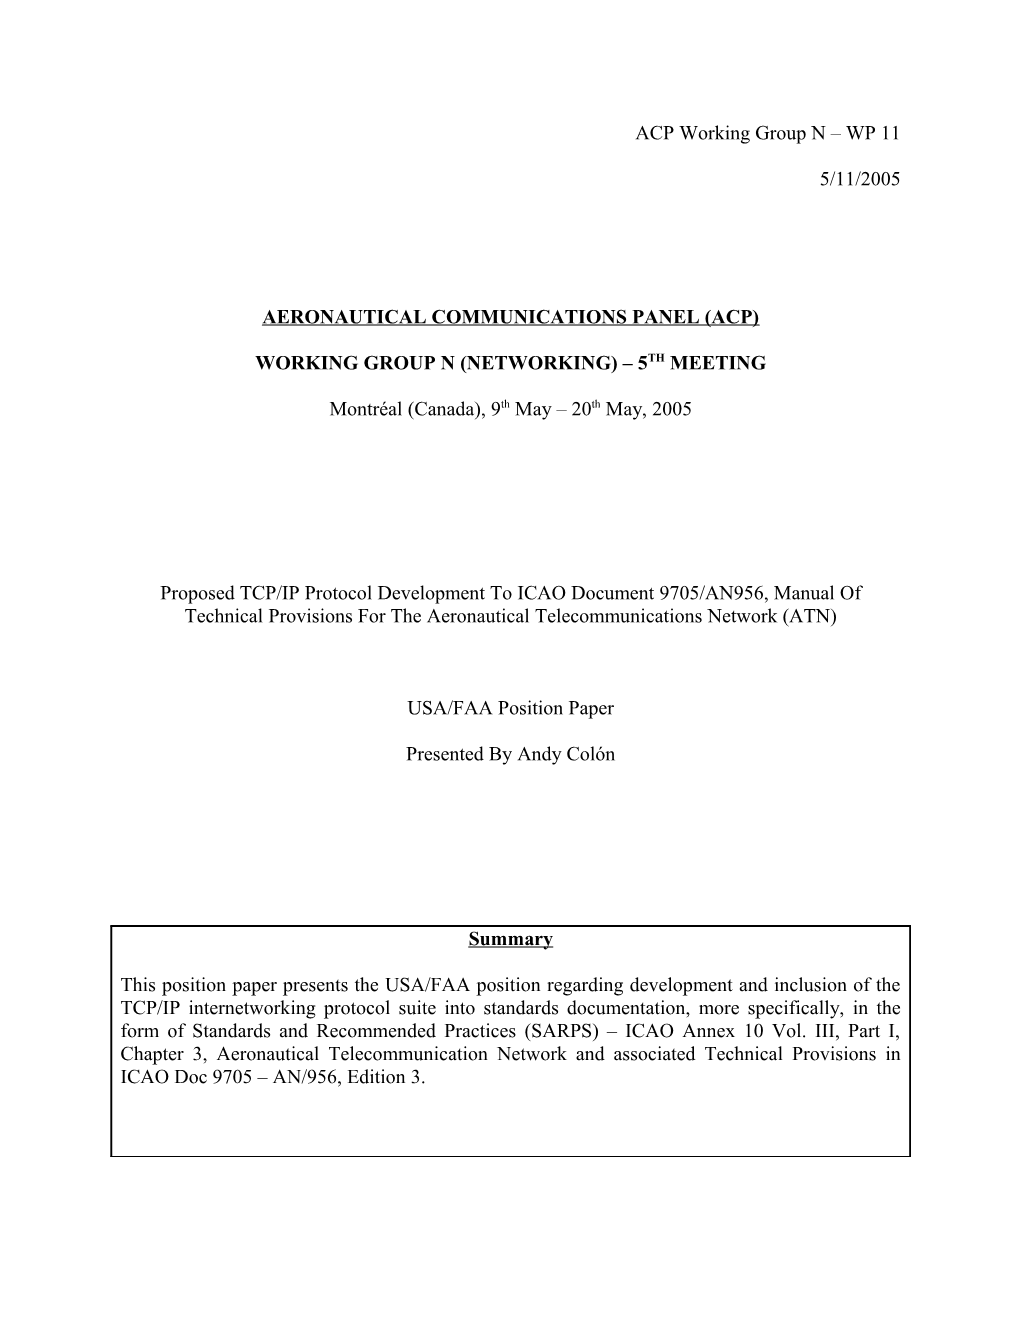 Proposed TCP/IP Protocol Development to ICAO Document 9705/AN956, Manual of Technical Provisions